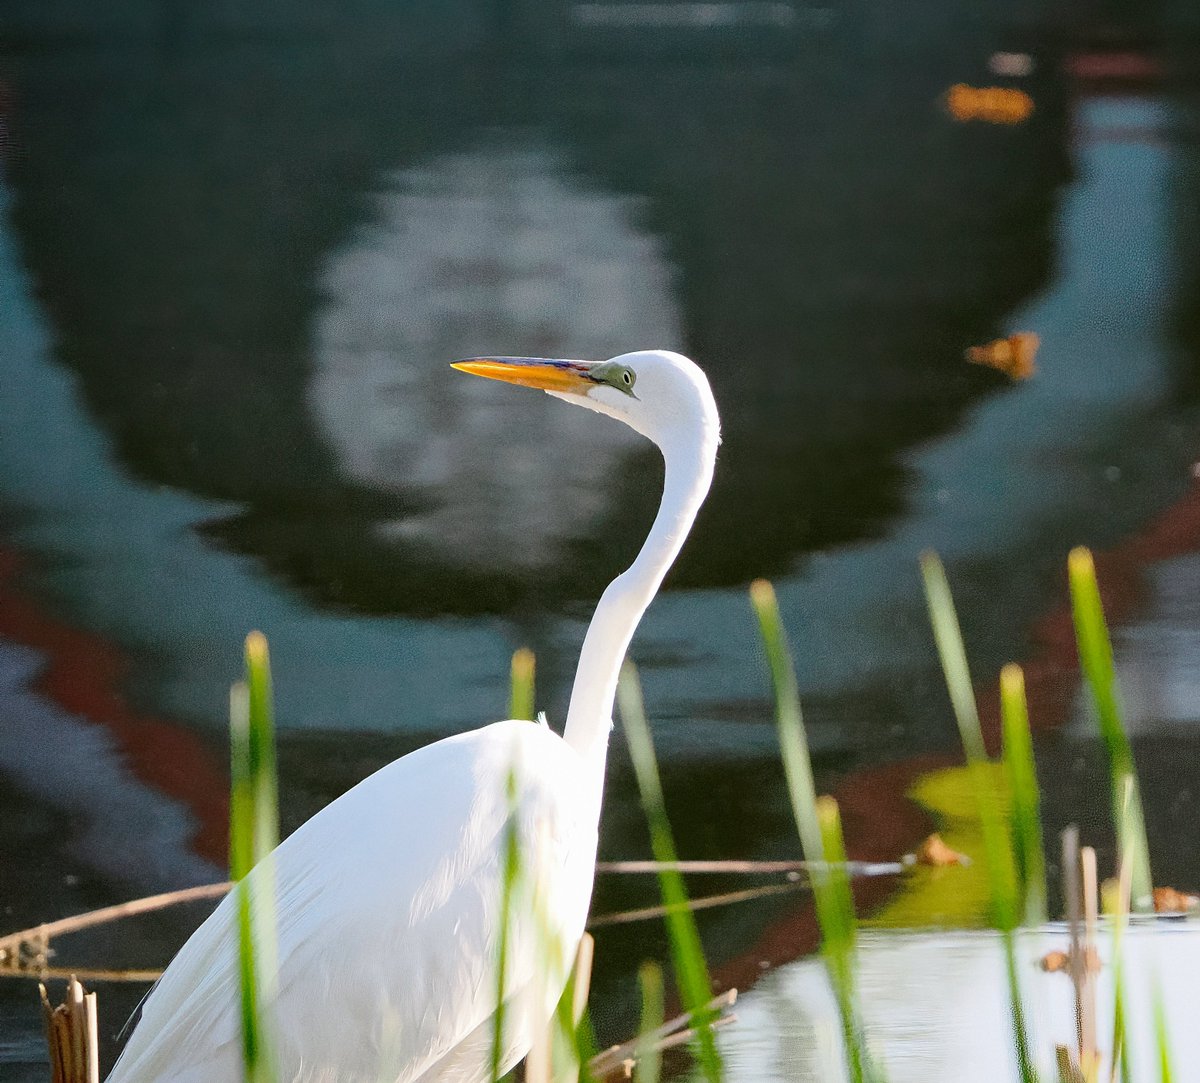 Spotted a Great Egret along a very still Harlem Meer early this morning. Though it looks like a full moon in the reflection, that's actually Central Park's Dana Discovery Center. 🥰🥰🥰#egret #CentralPark #birdcpp